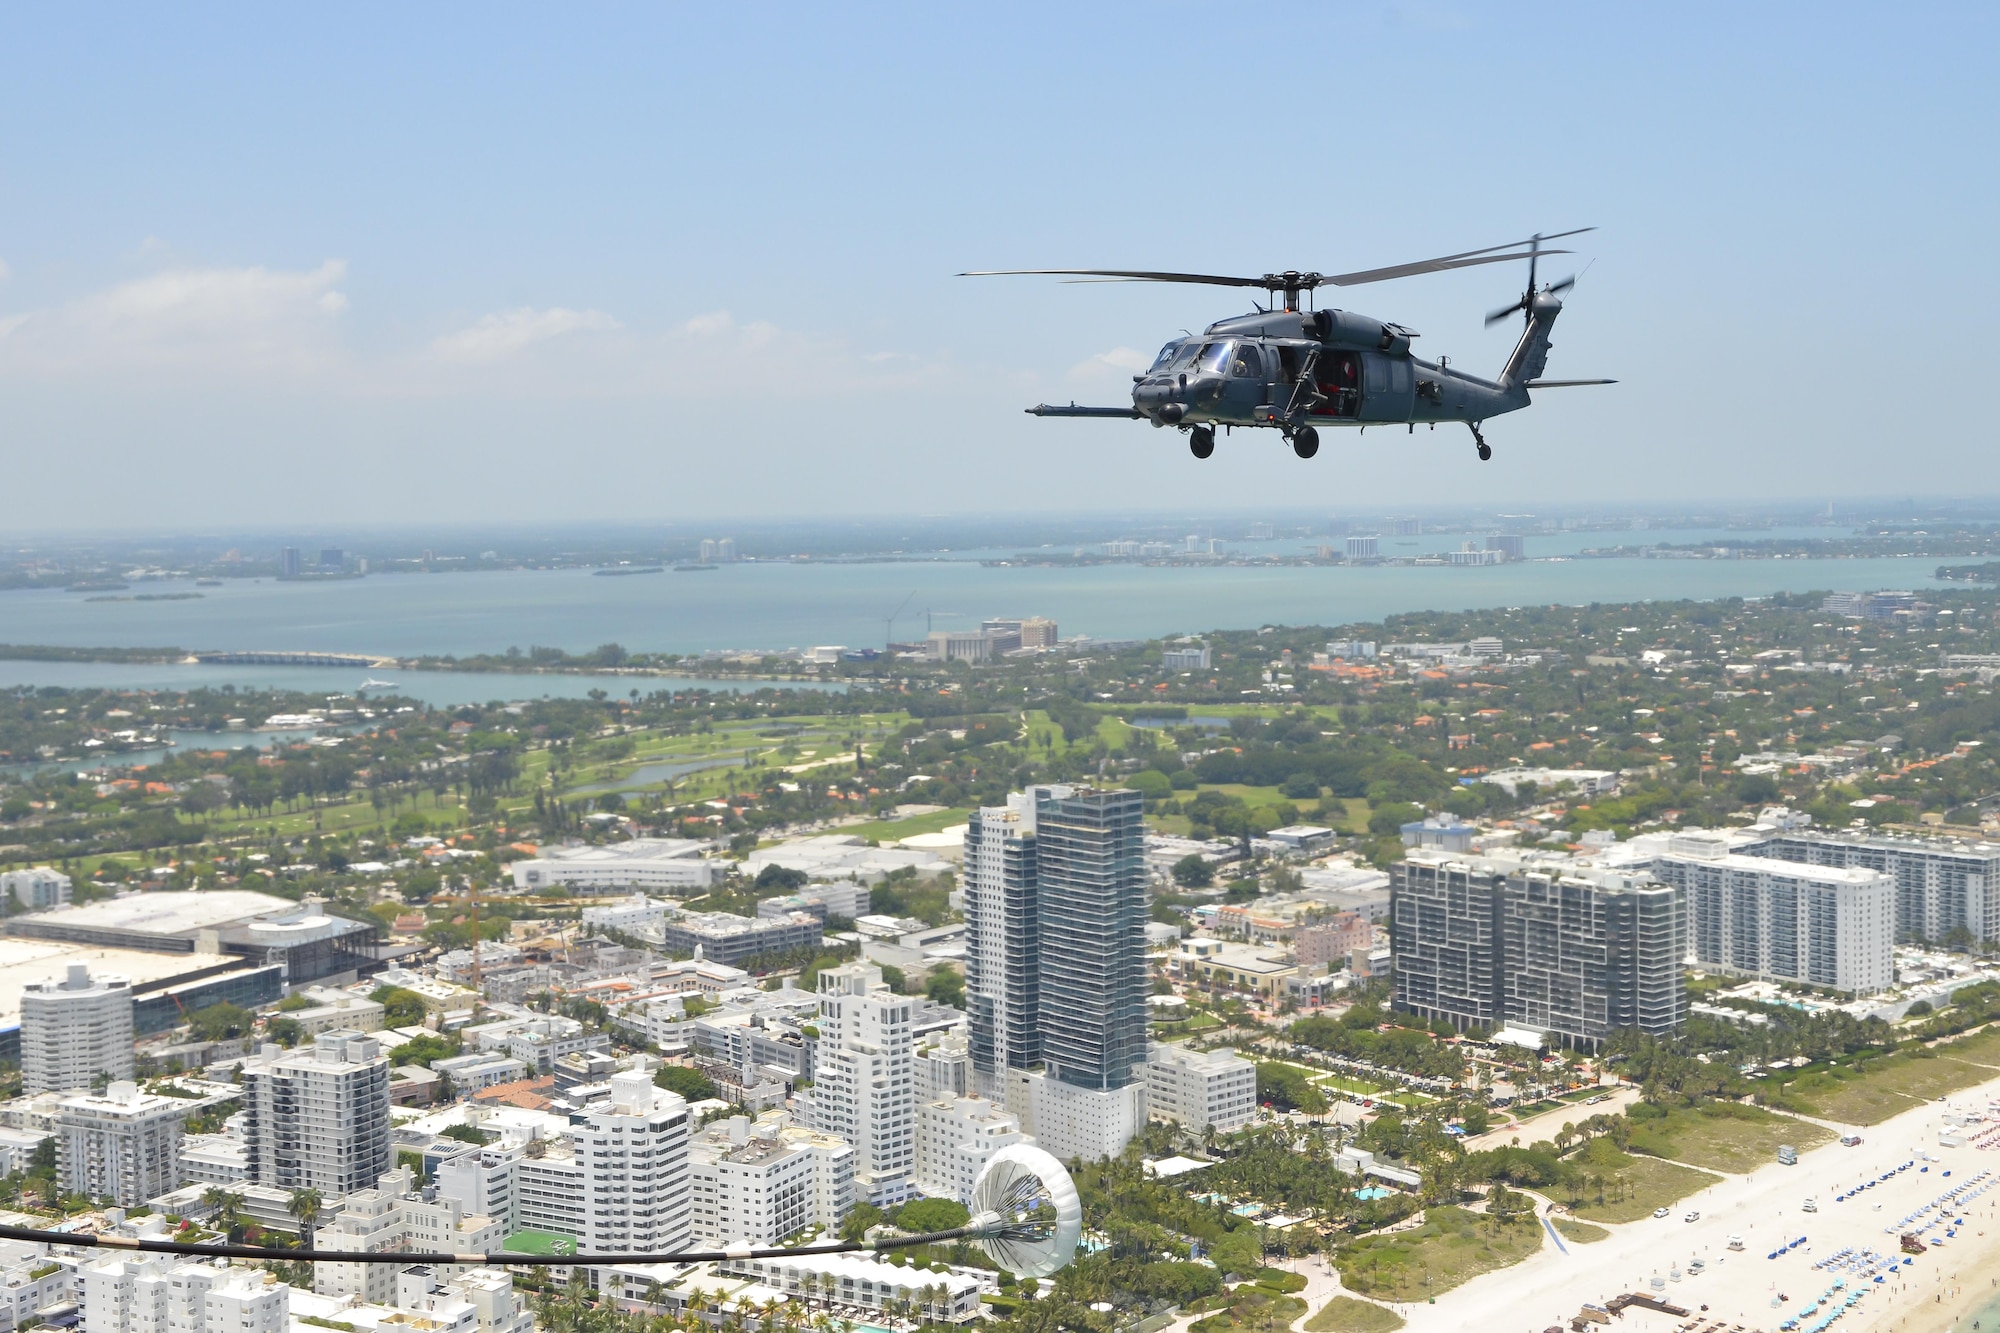 Aircrew from the 920th Rescue Wing out of Patrick Air Force Base, Fla., fly an HH-60G Pave Hawk helicopter during the National Salute to America’s Heroes Air and Sea Show, May 26, 2017, at Miami Beach, Fla. Top tier U.S. military assets assembled in Miami to showcase air superiority while honoring those who have made the ultimate sacrifice during the Memorial Day weekend. The 920th Rescue Wing, the Air Force Reserve’s only rescue wing, headlined the airshow, demonstrating combat-search-and-rescue capabilities, by teaming up with a HC-130P/N Combat King and four A-10 Thunderbolt II aircraft. (U.S. Air Force photo/Senior Airman Brandon Kalloo Sanes)